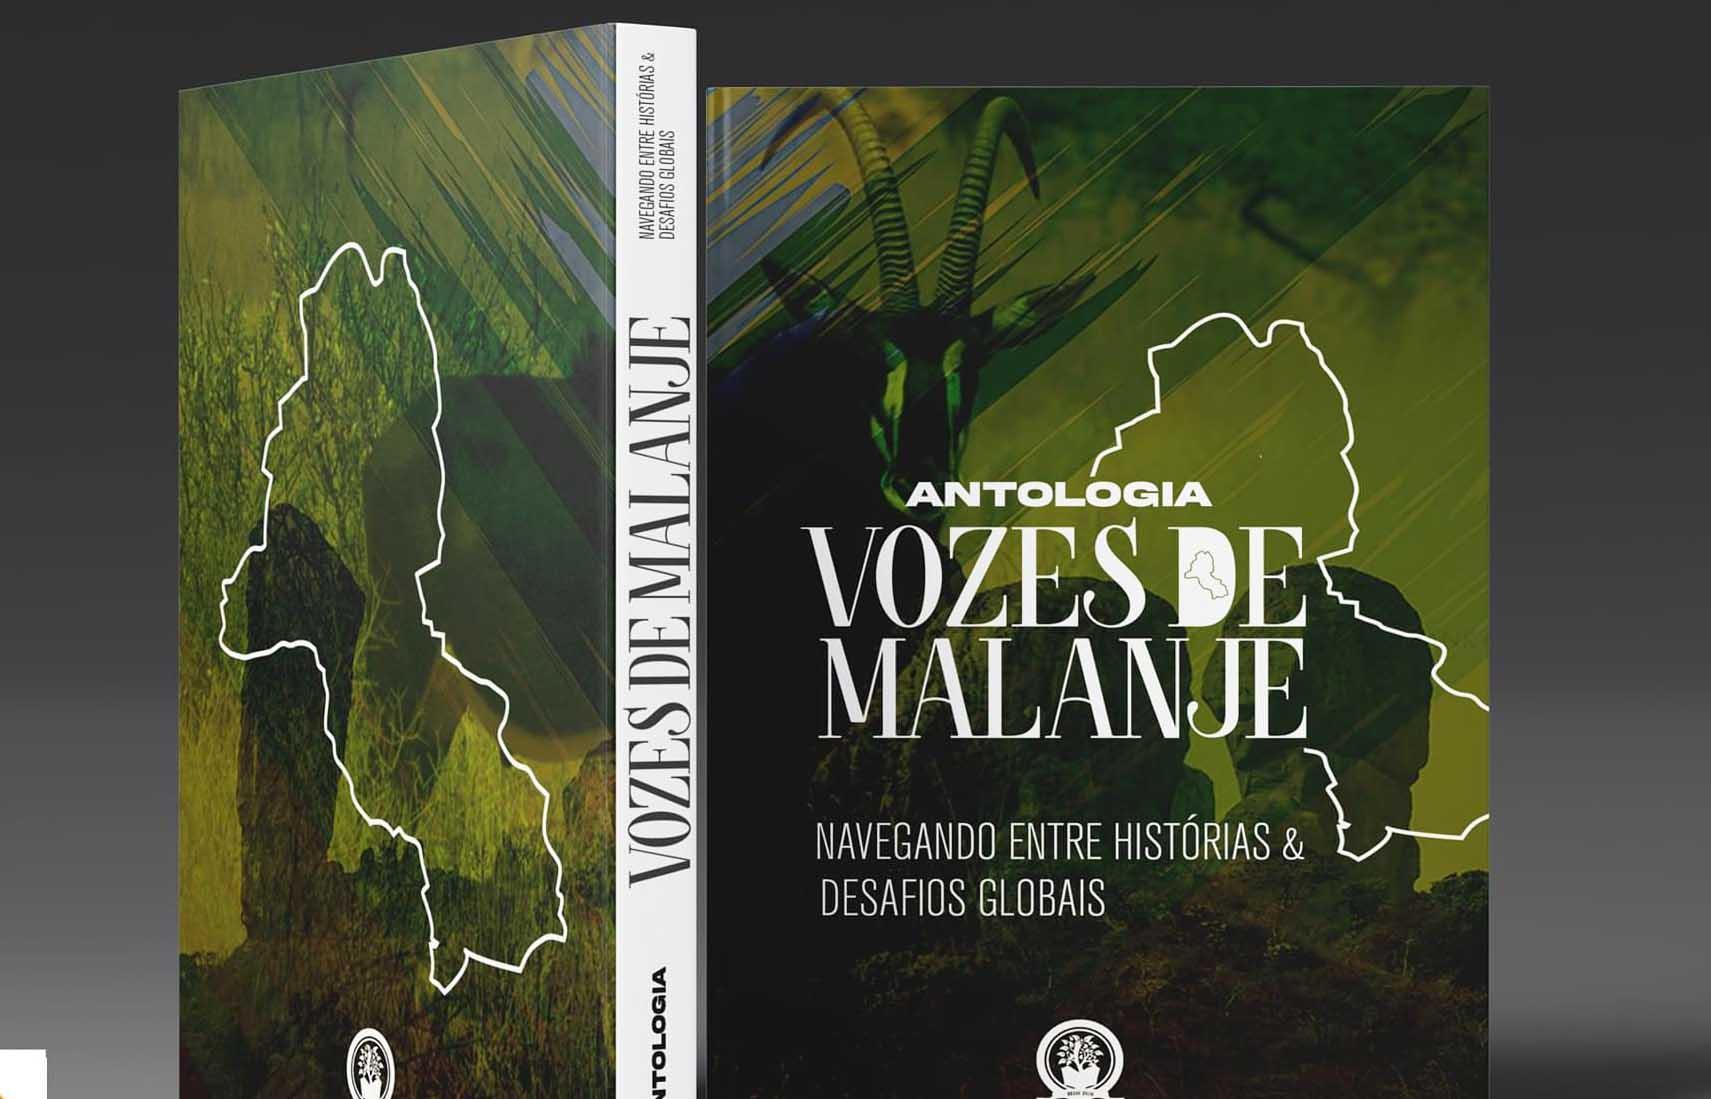 Old and new generation of writers give shape to the anthology “Vozes de Malanje”